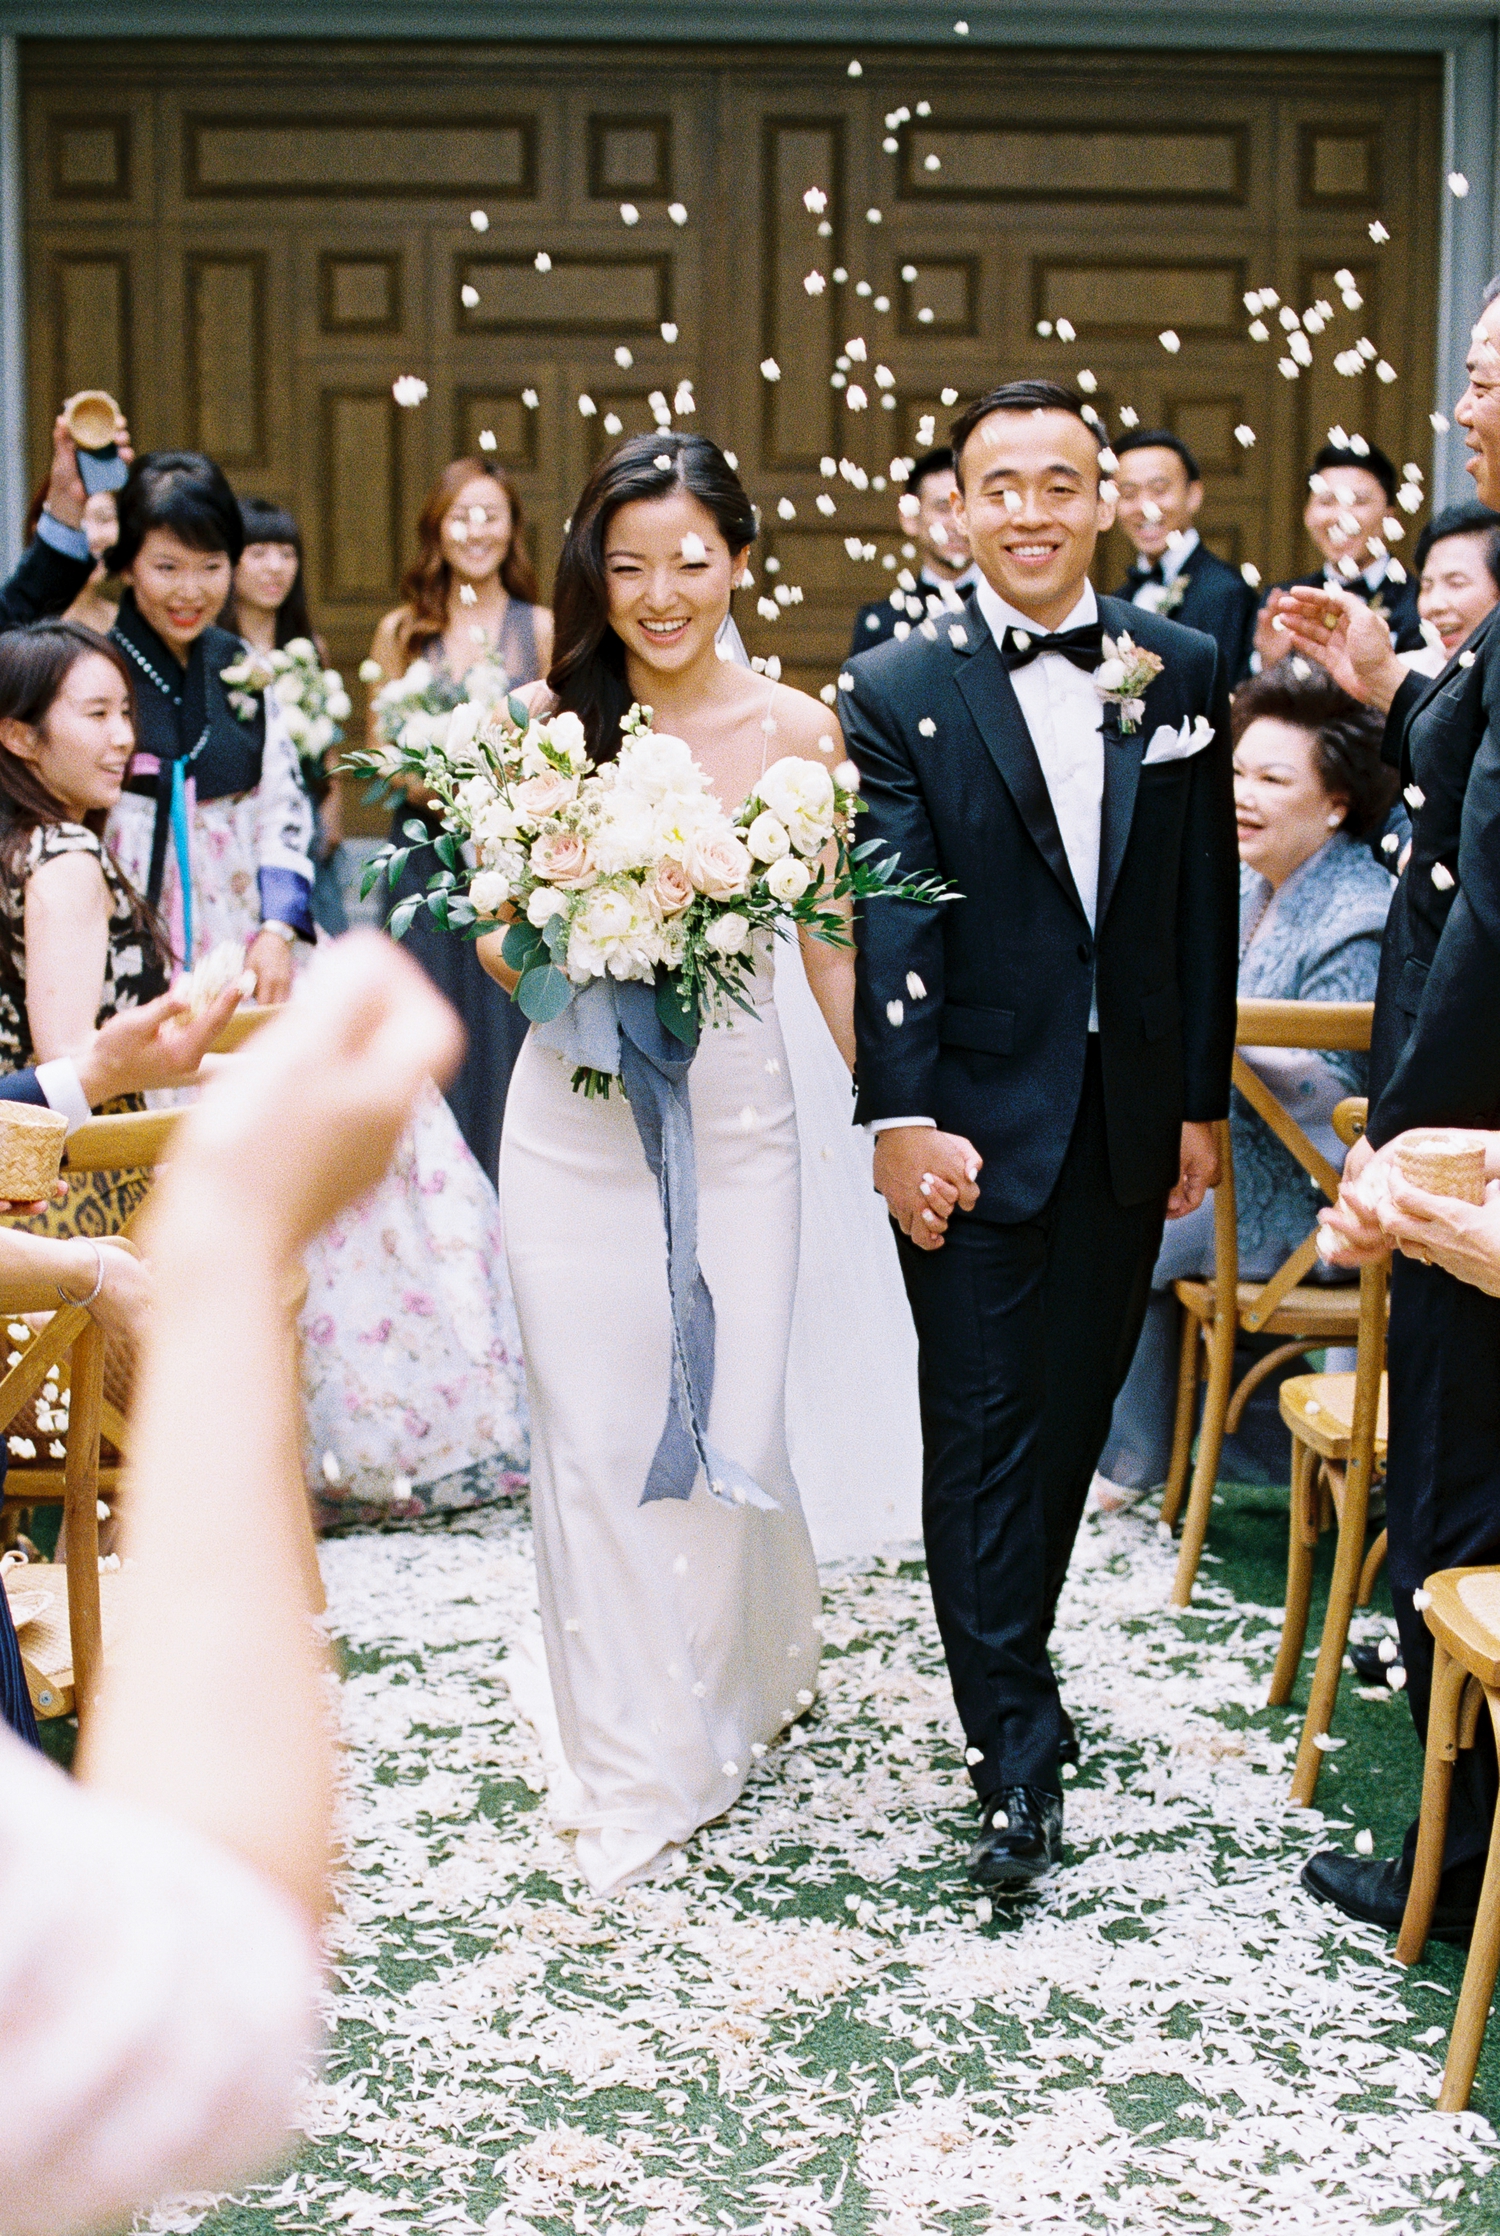 wedding recessional with flower petals